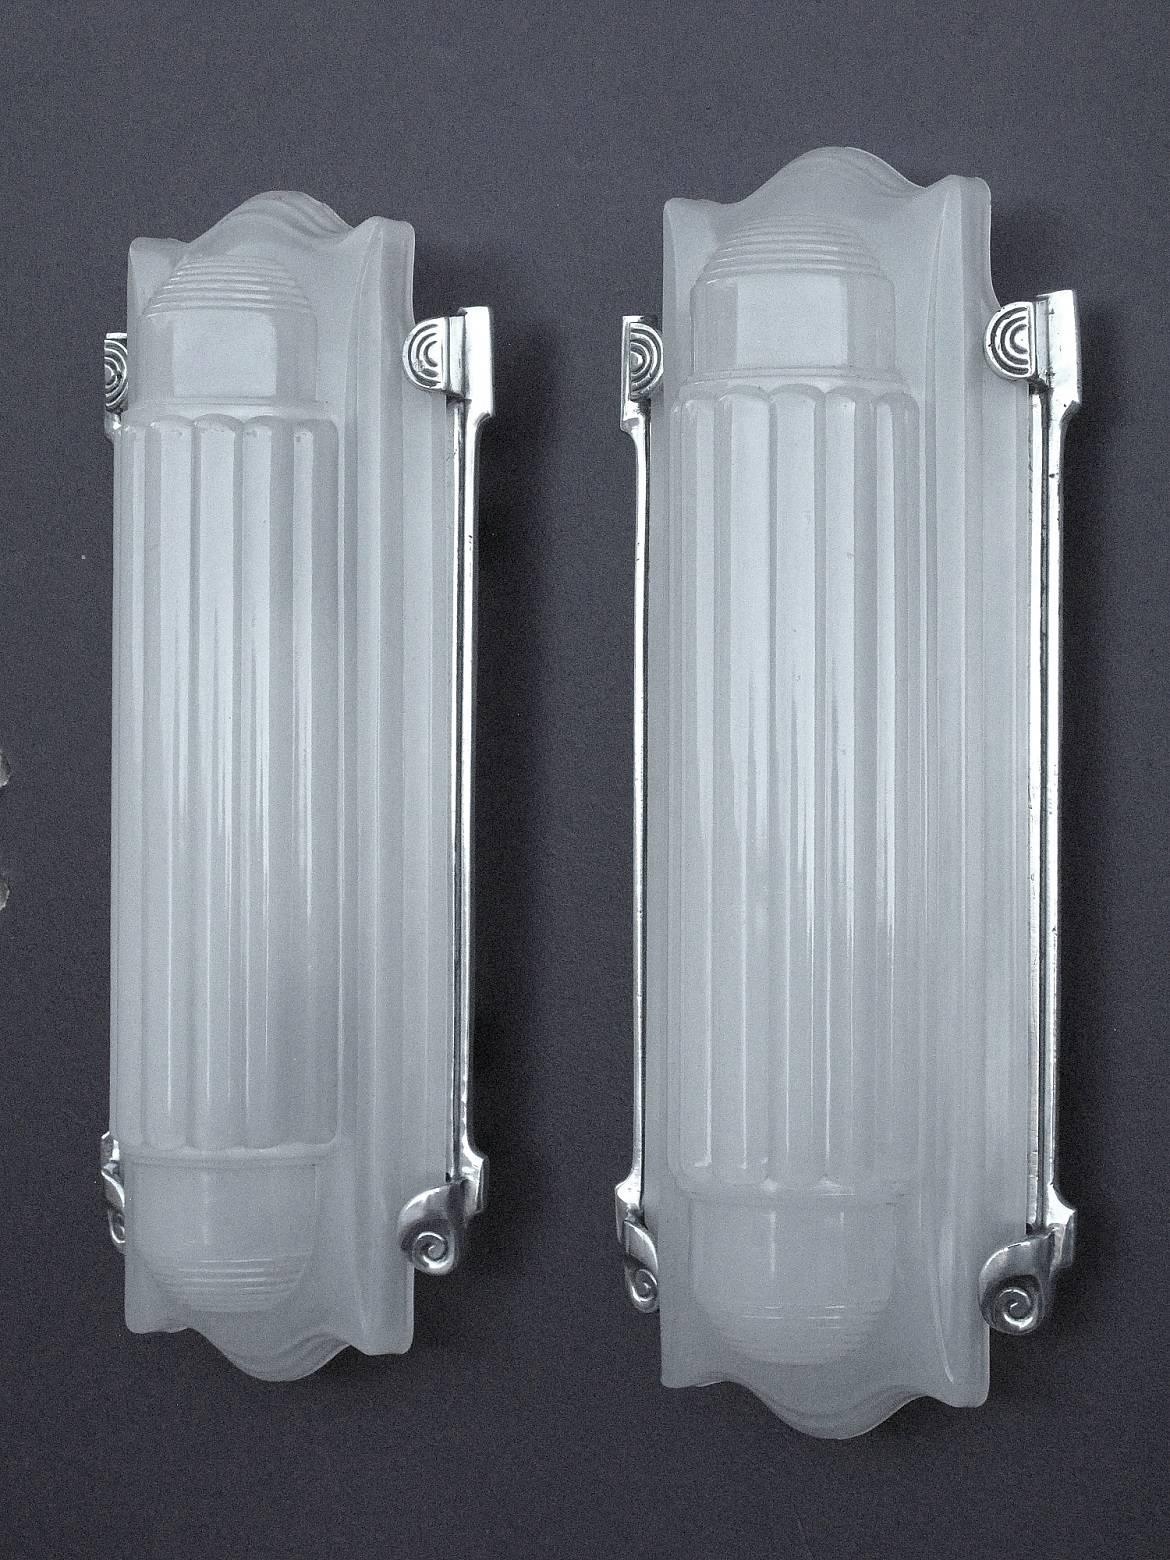 What a great pair of vintage 1920s-1930s Art Deco wall fixtures. Minimal yet refined, elegant, and very serious. Mini skyscrapers for your wall. The opaque glass shades nest quietly into the polished aluminum frames. Shown in natural daylight